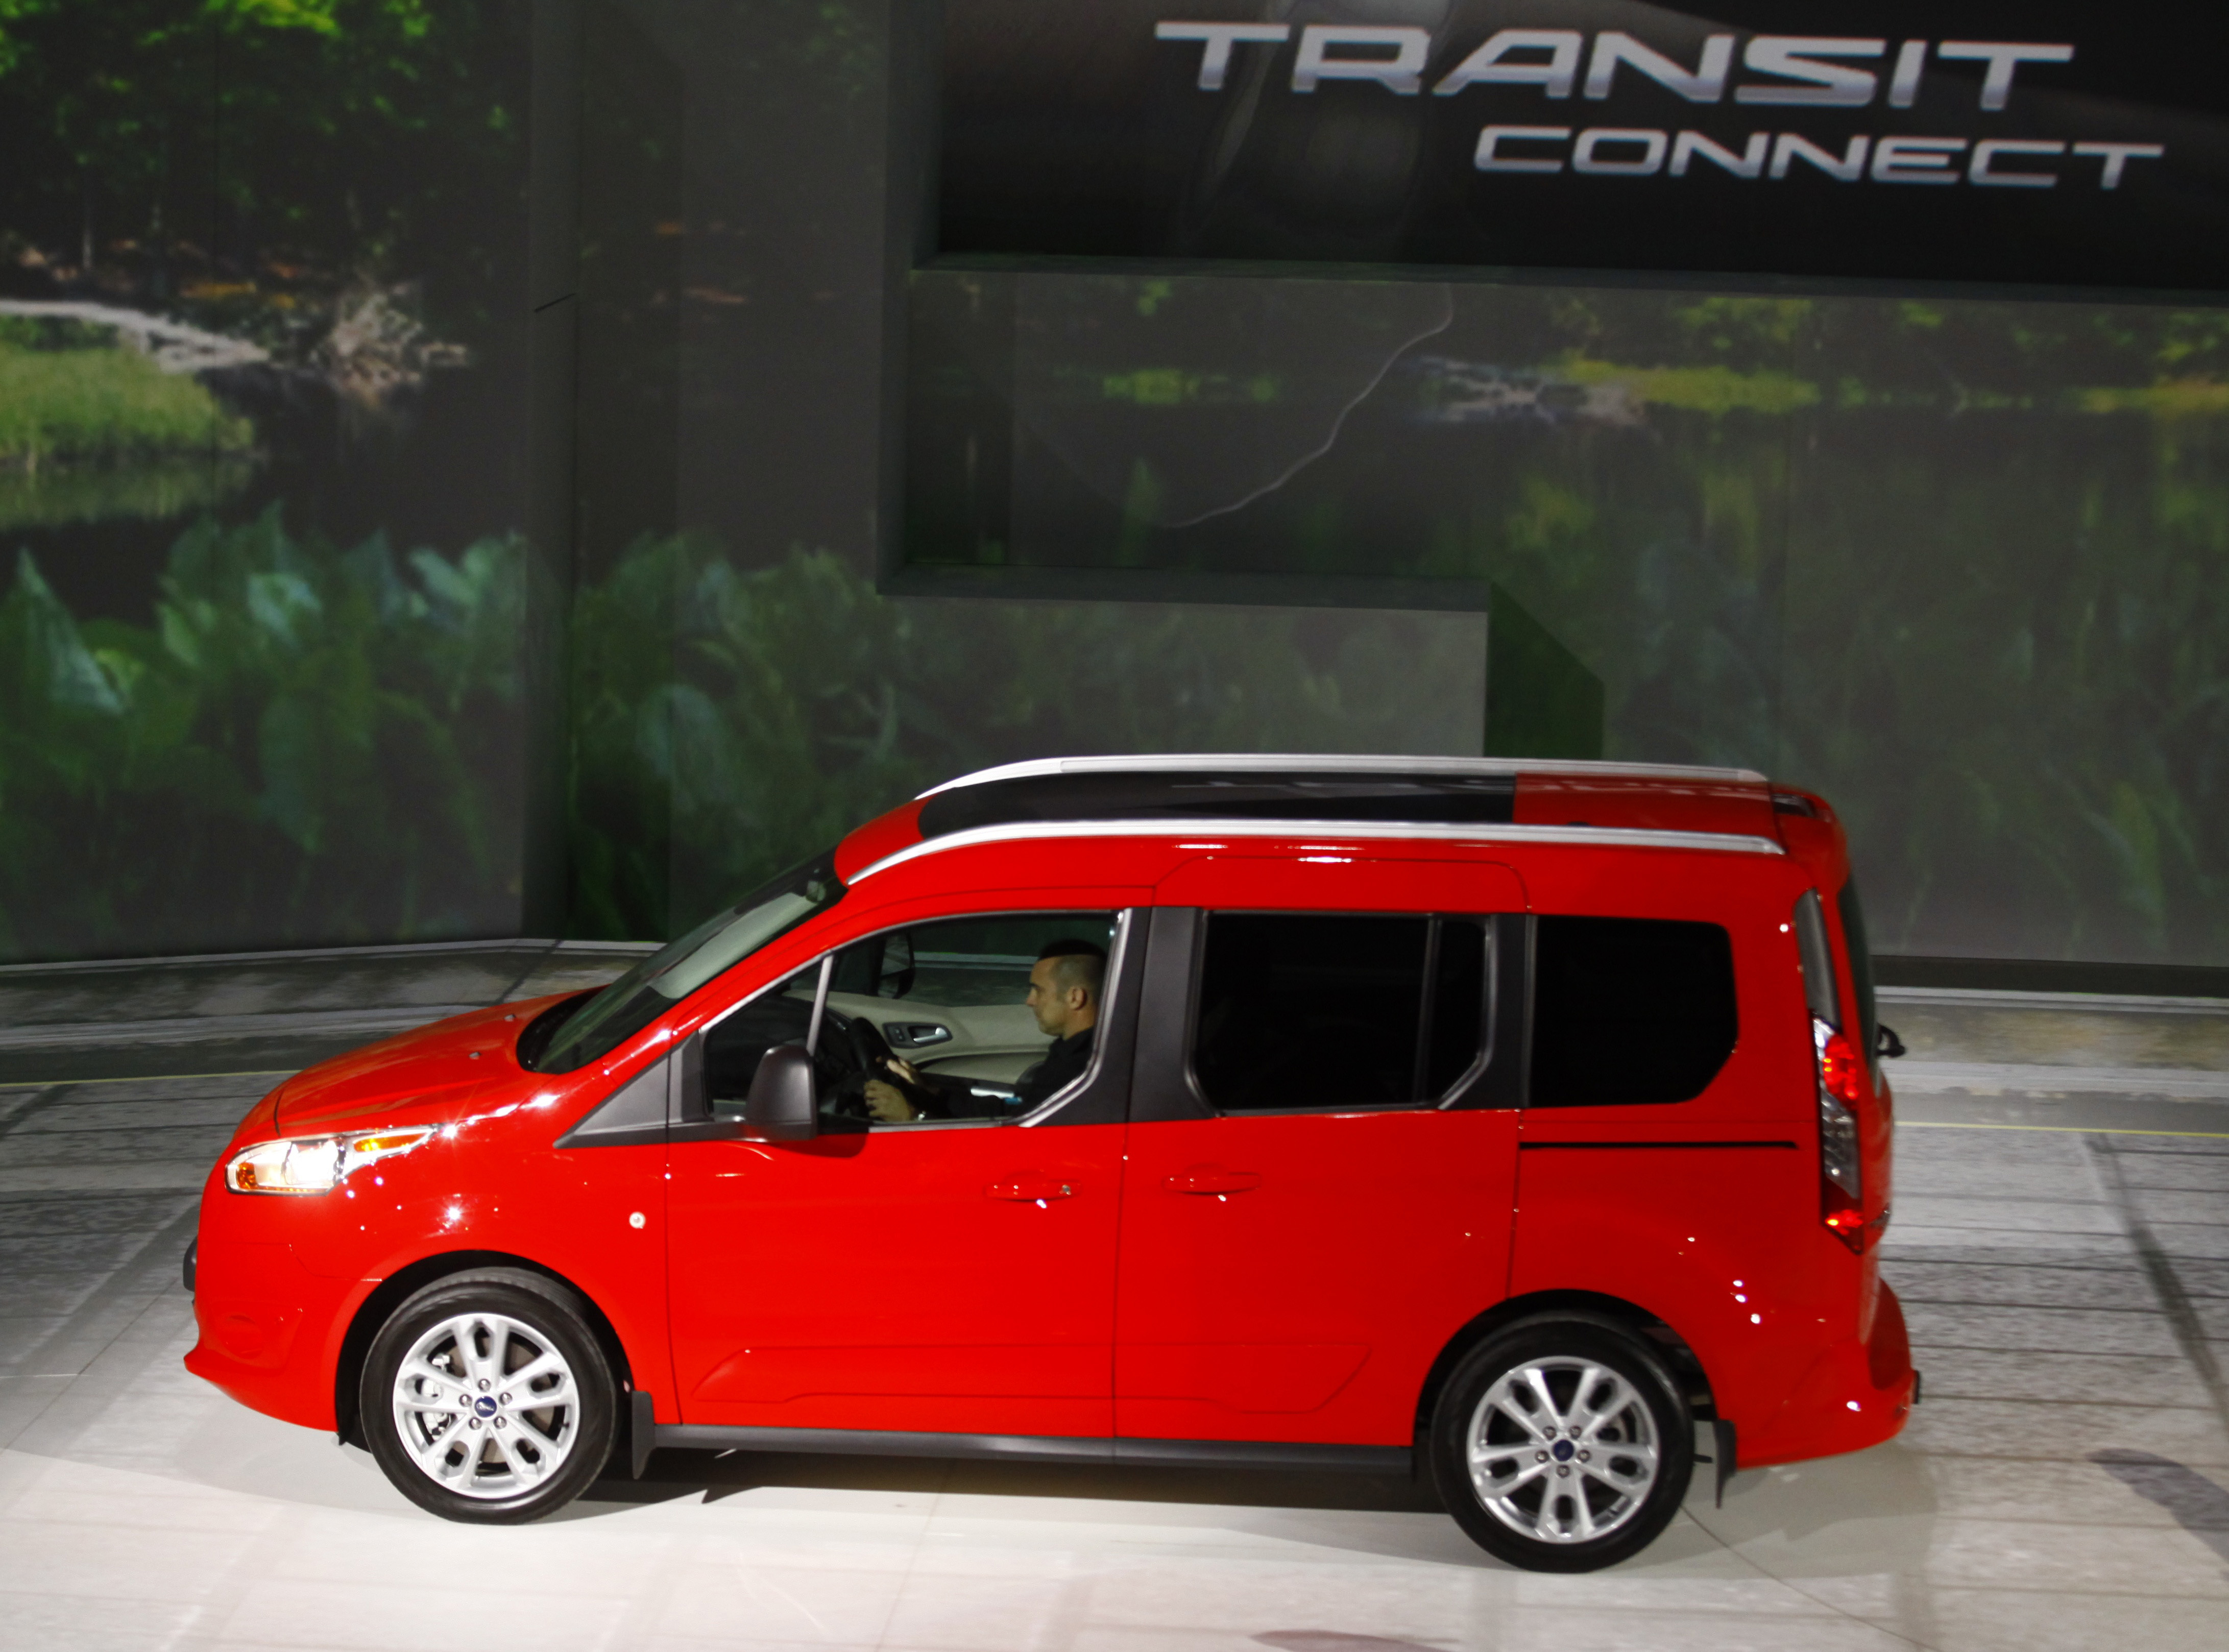 A Ford Transit Connect is displayed during the press preview day of the North American International Auto Show in Detroit